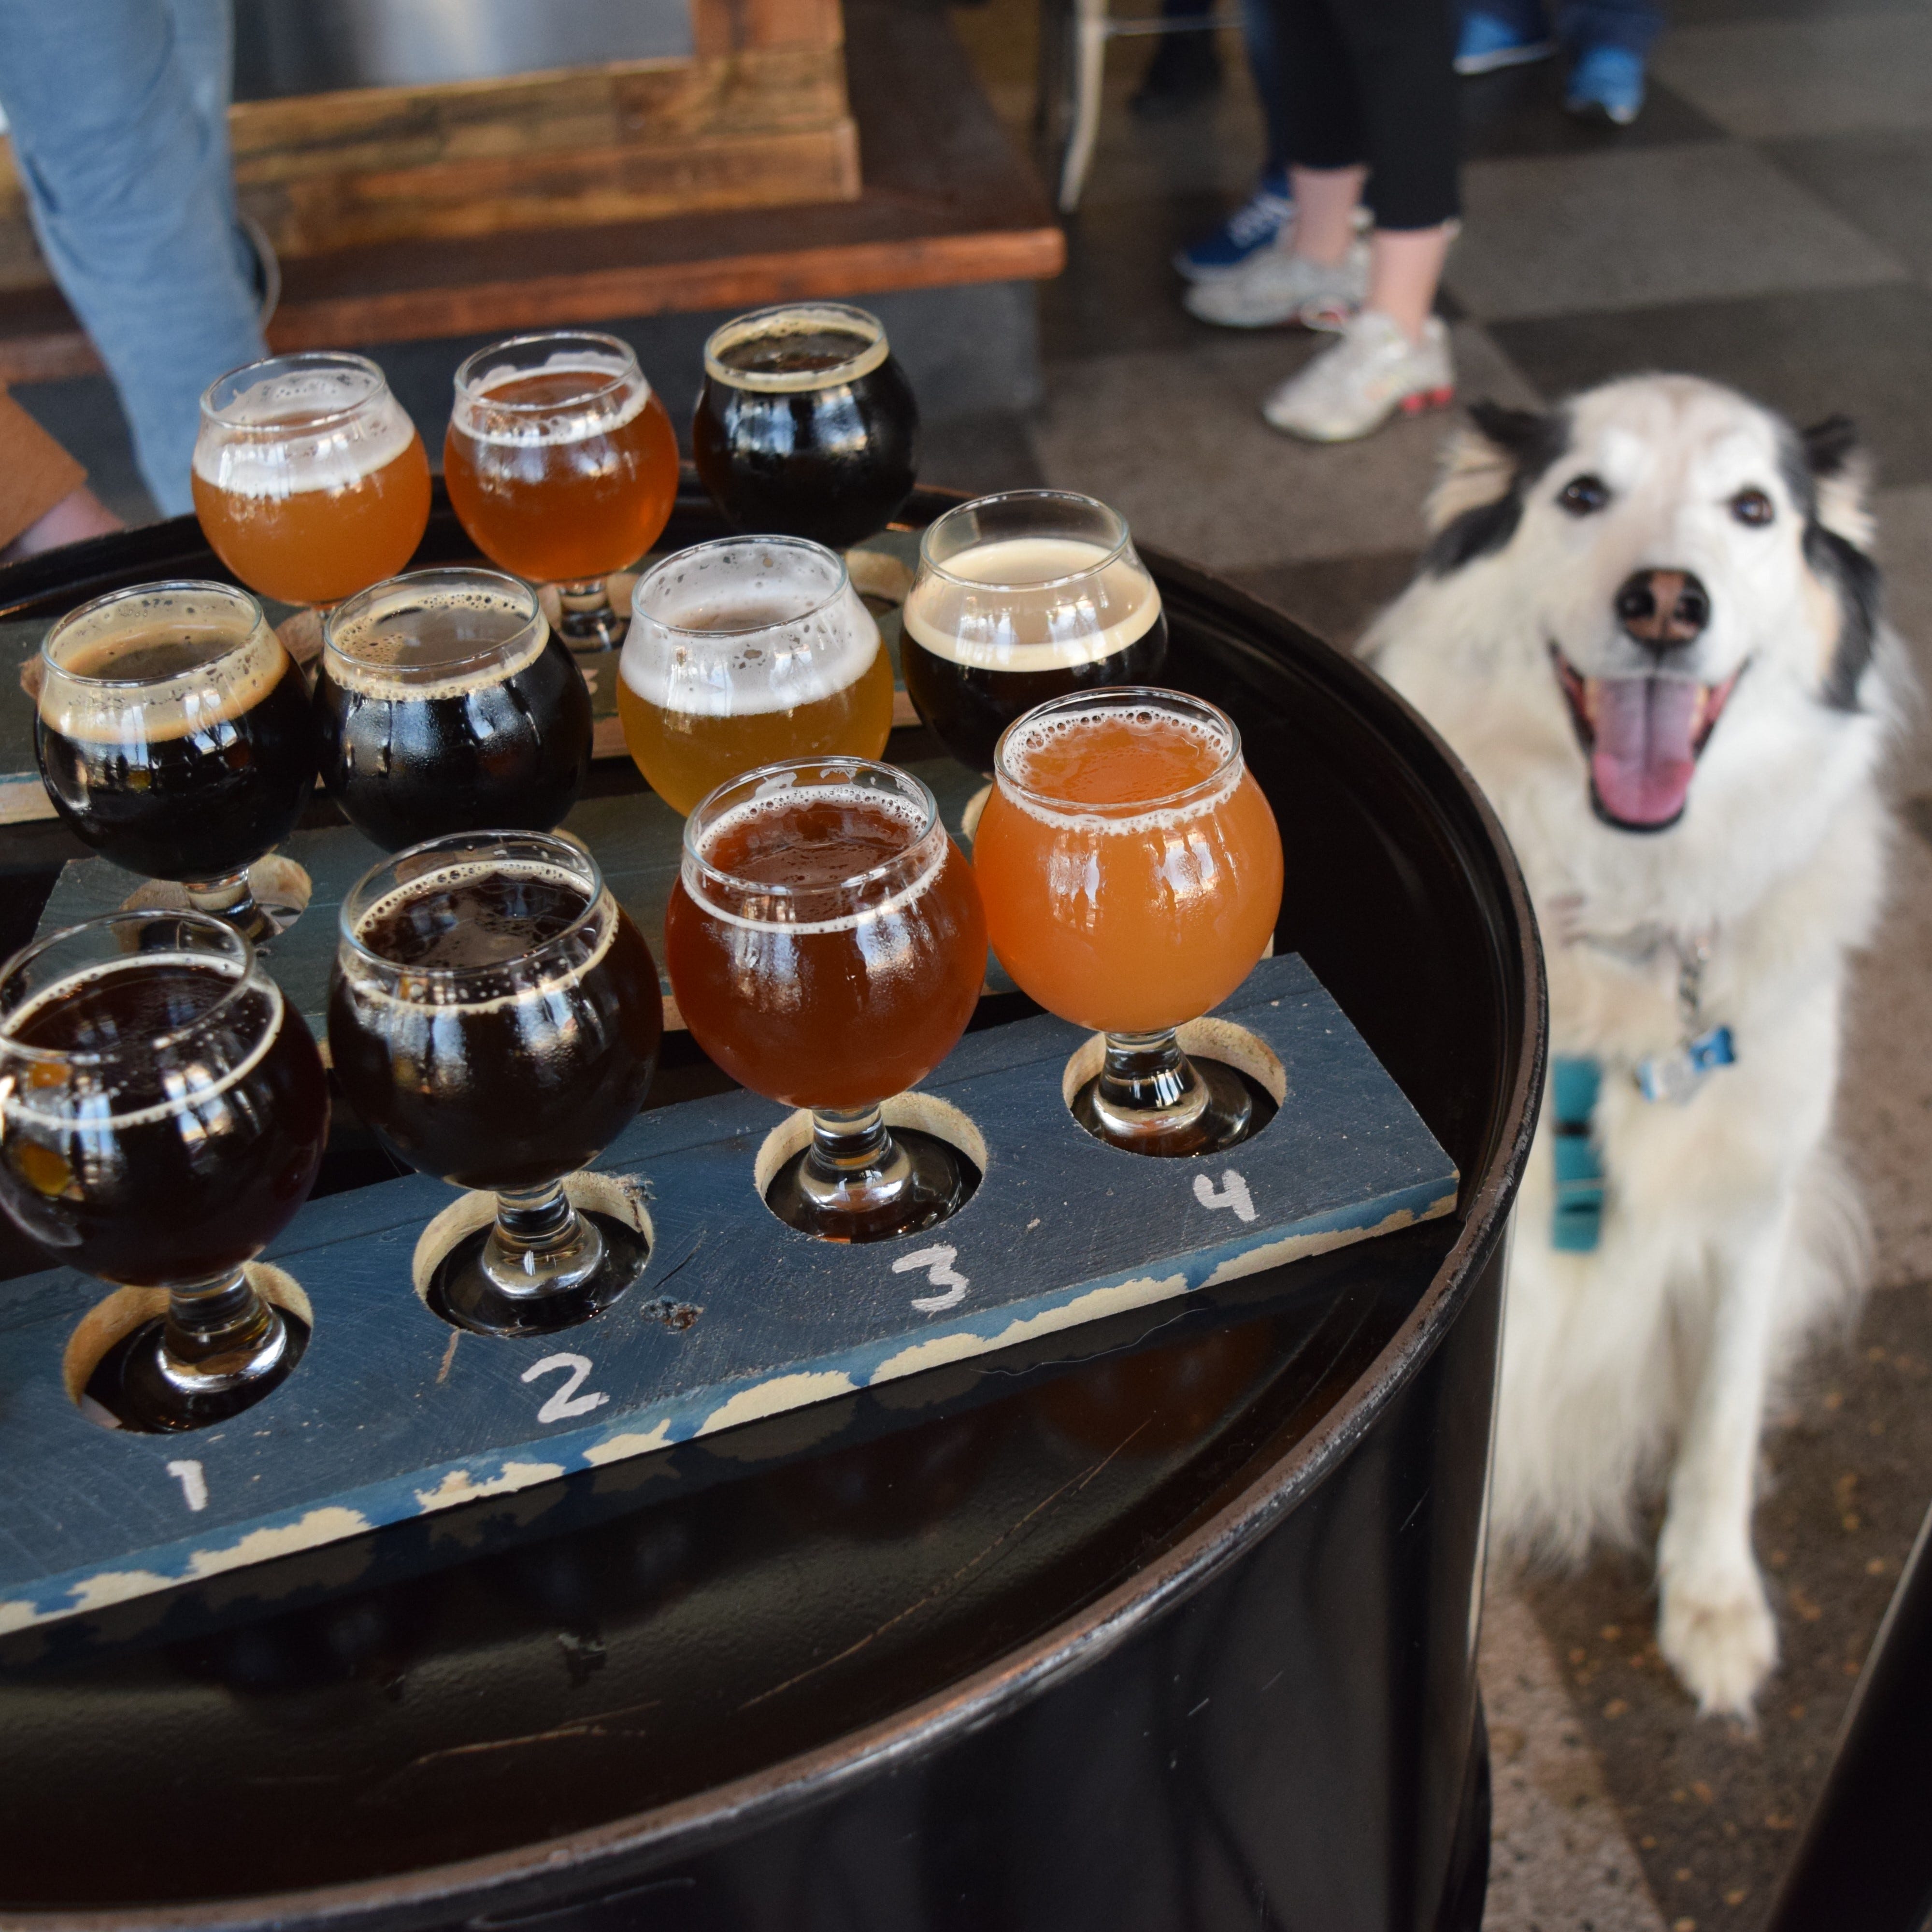 Dark City Brewing in Asbury Park, New Jersesy, sponsors special canine-themed events like a 